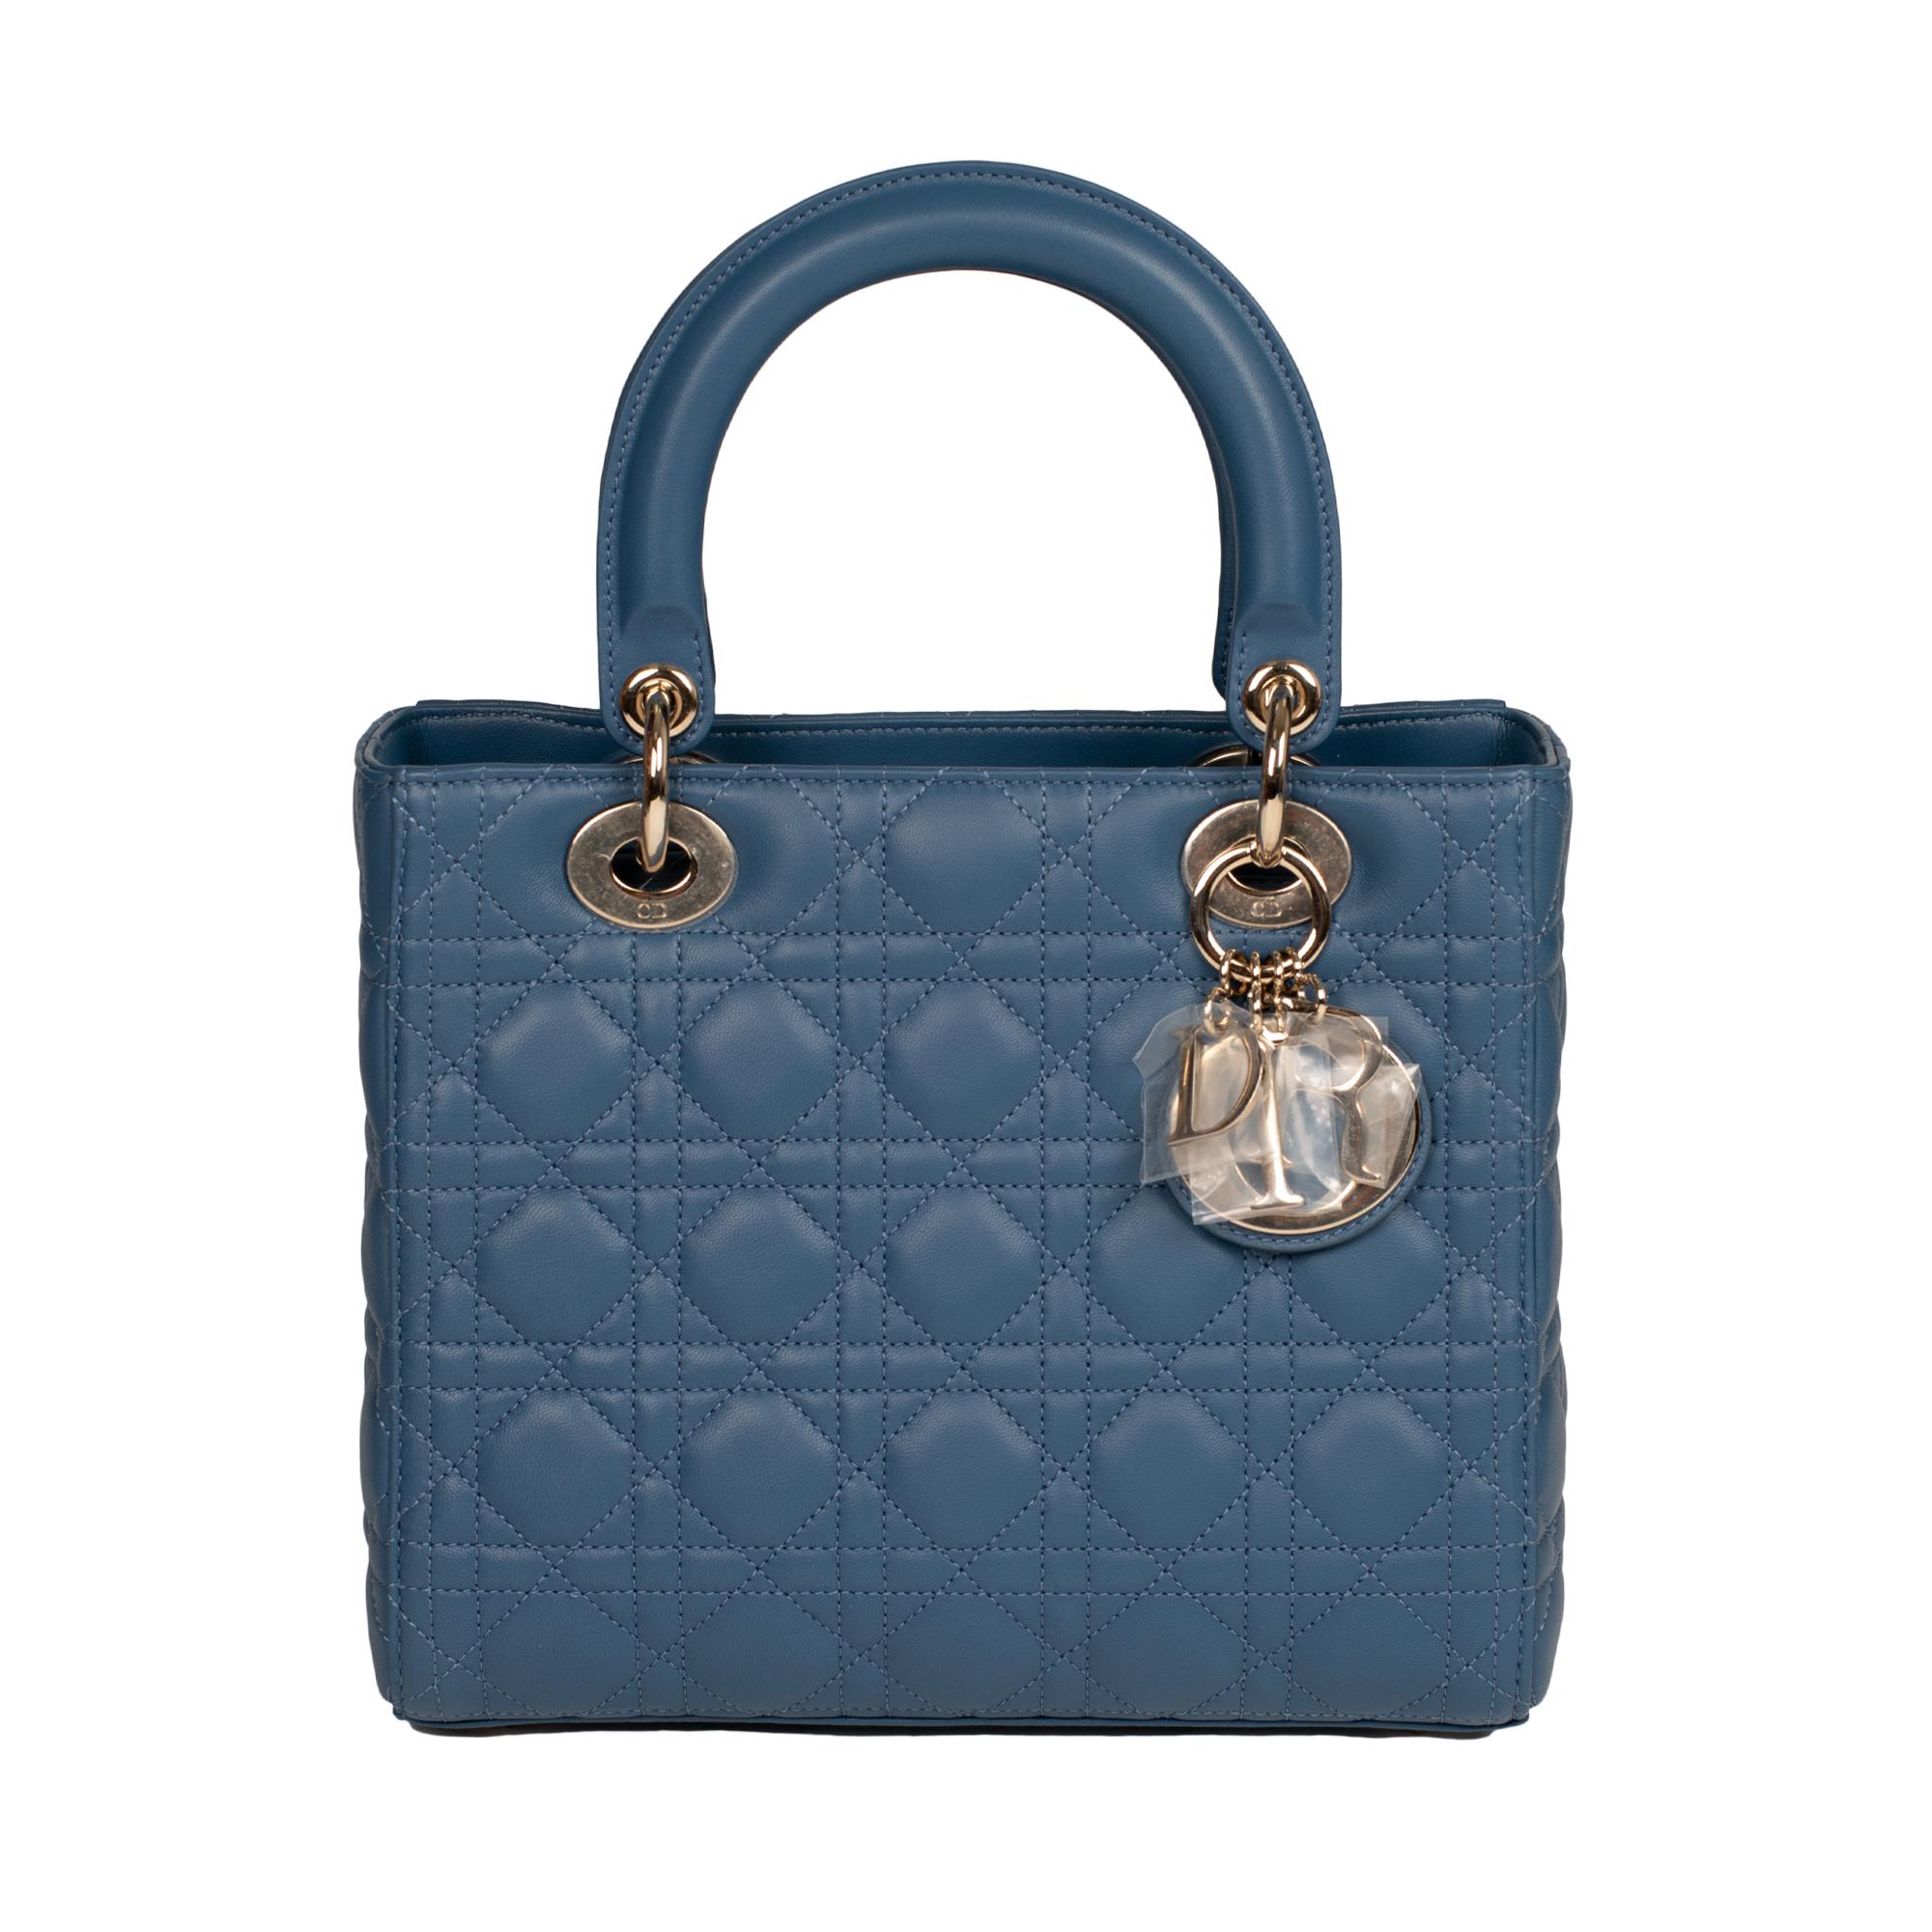 The very Classy shoulder bag Dior Lady Dior medium model in blue cannage leather, silver metal trim, double handle in blue leather, removable shoulder strap handle in blue leather allowing a hand or shoulder support or shoulder strap.

It’s a zip